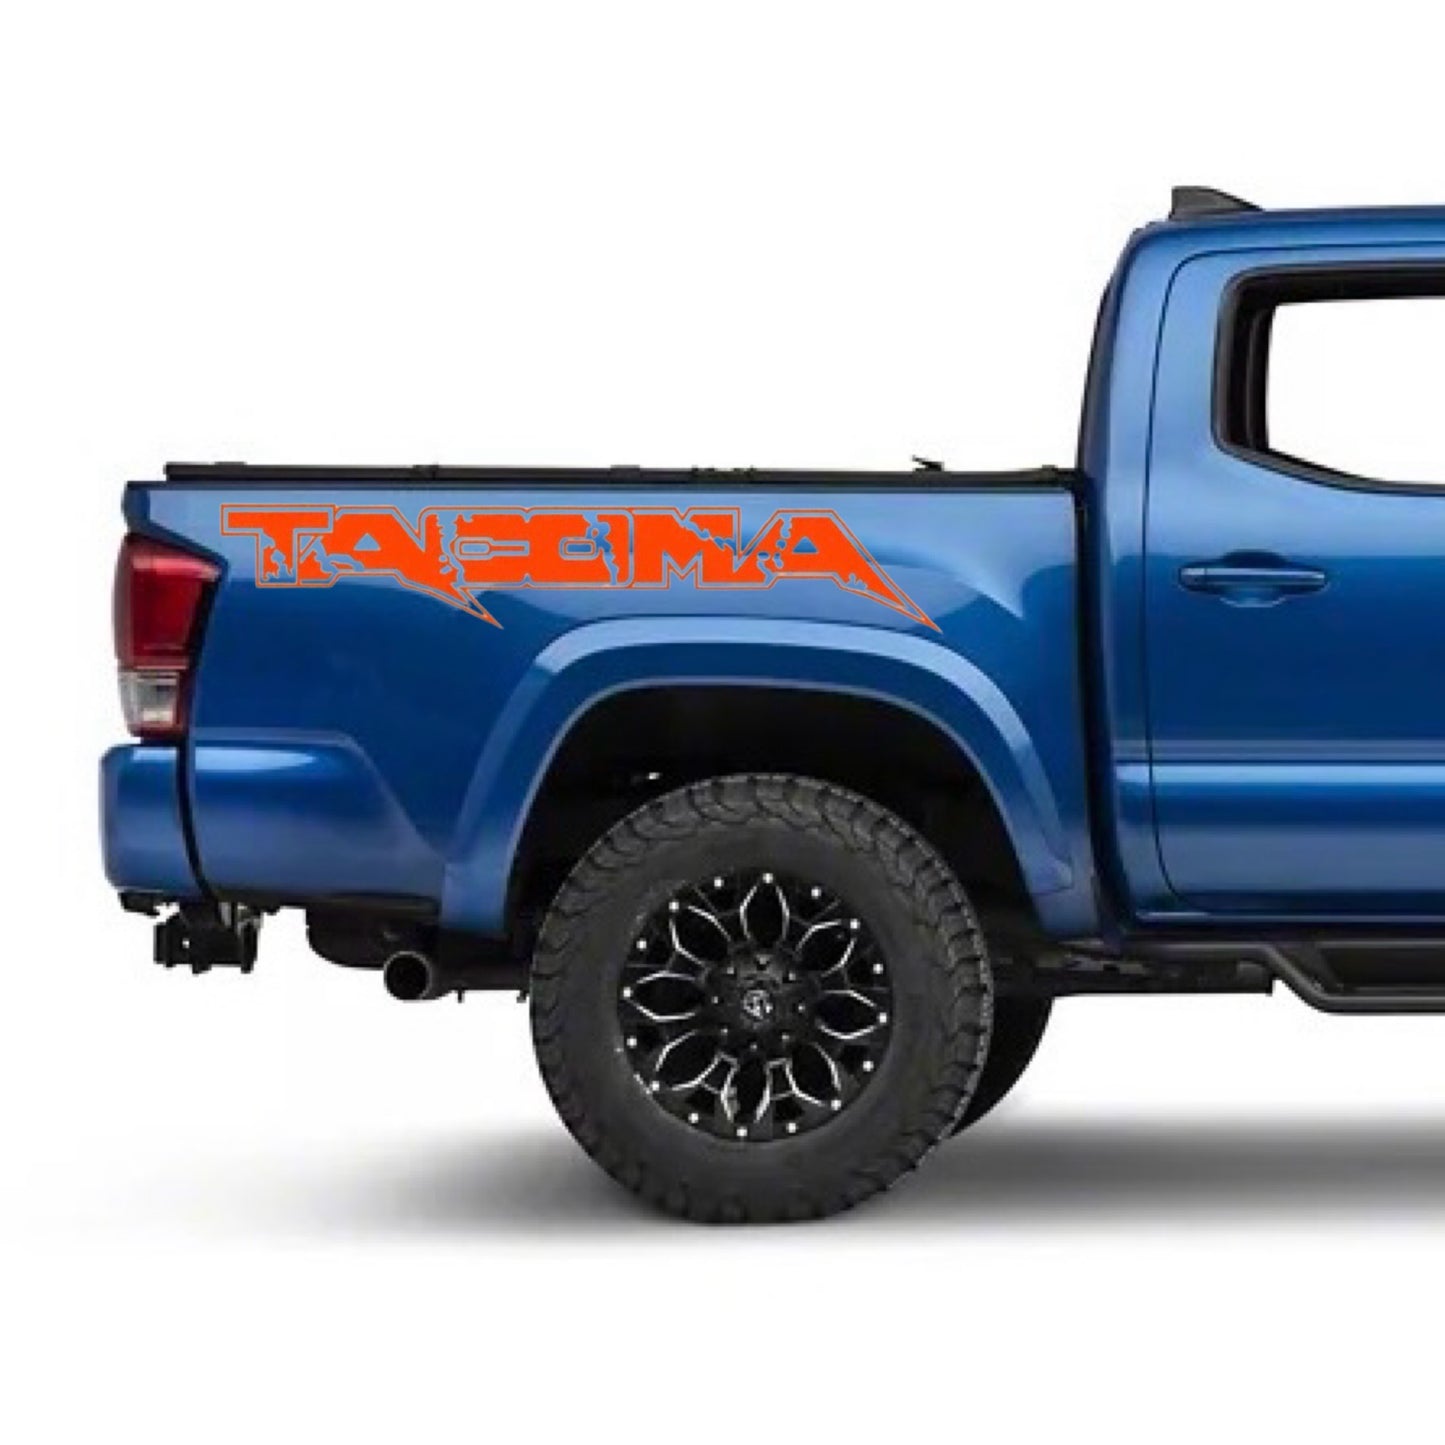 Toyota Tacoma Bed Side Vinyl Decal 48”x8” - 2 Pack (Pair)